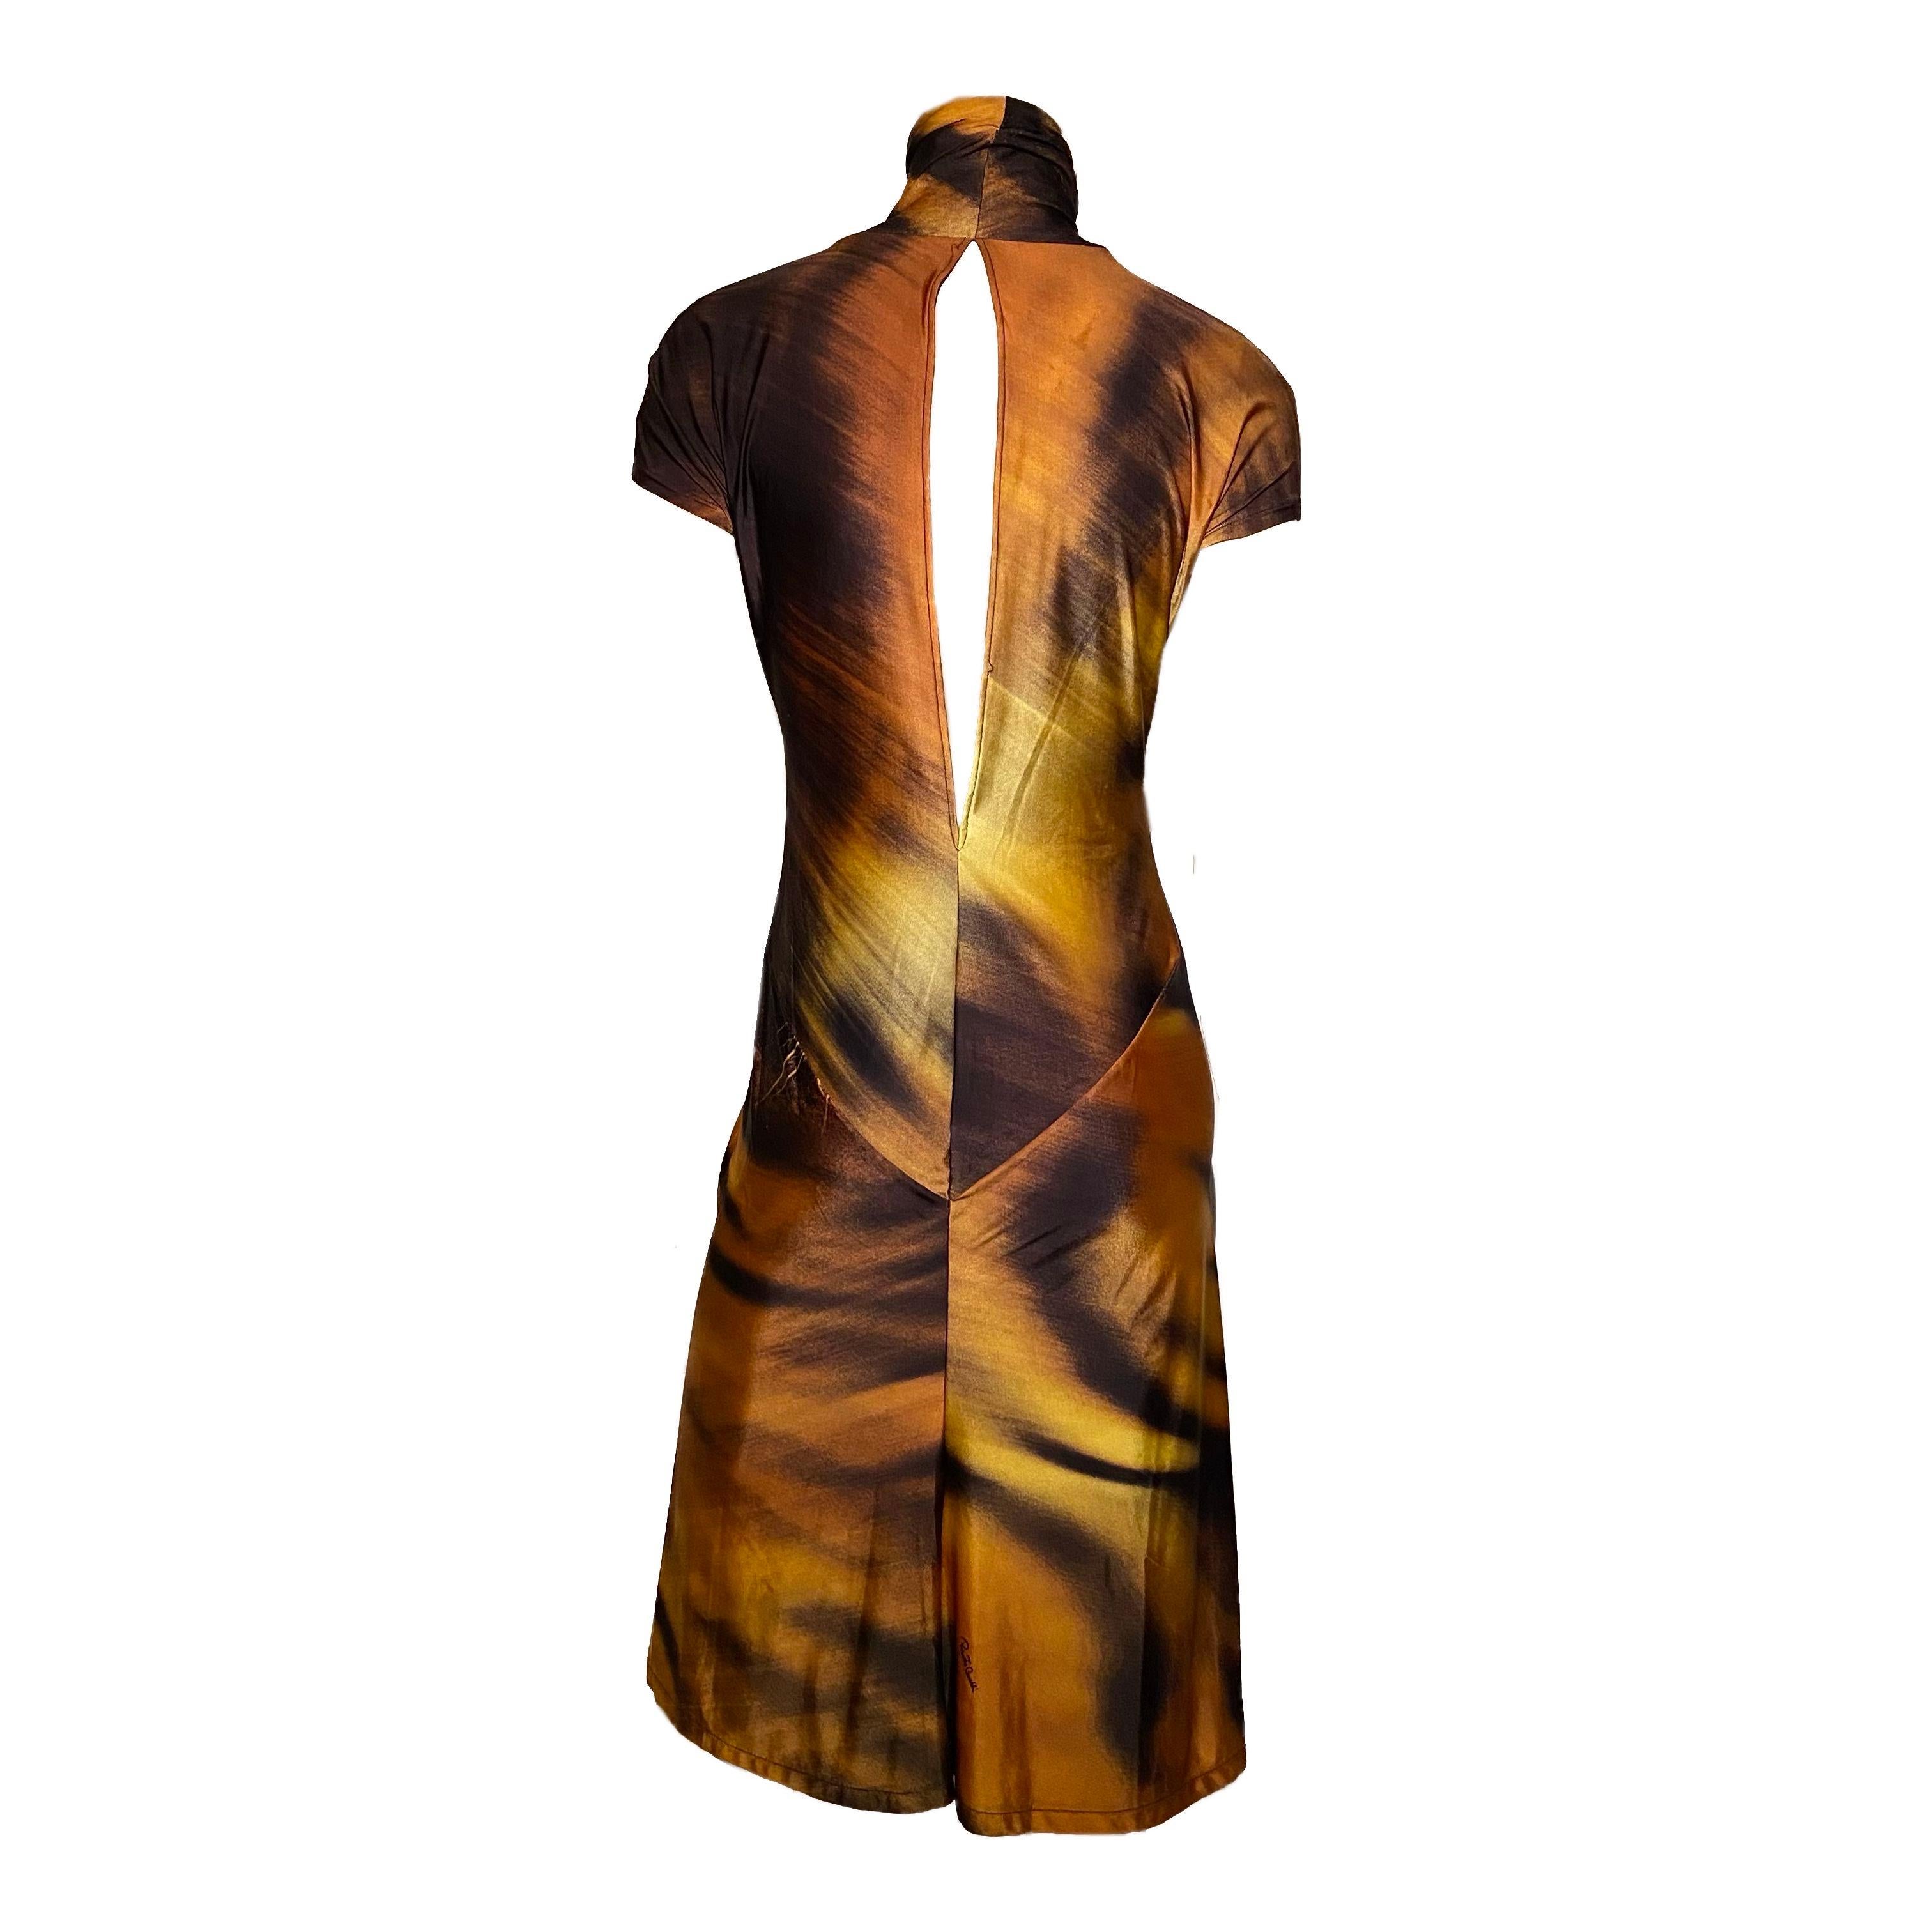 Roberto Cavalli knee-length turtleneck dress with back cut-out detail and black/orange tiger print from Fall/Winter 2000 collection.

Label removed, stretchy fabric (fits S up to bigger sizes) 

total length: 104 cm/ 40,9 inch 
bust: 84 cm/ 33 inch